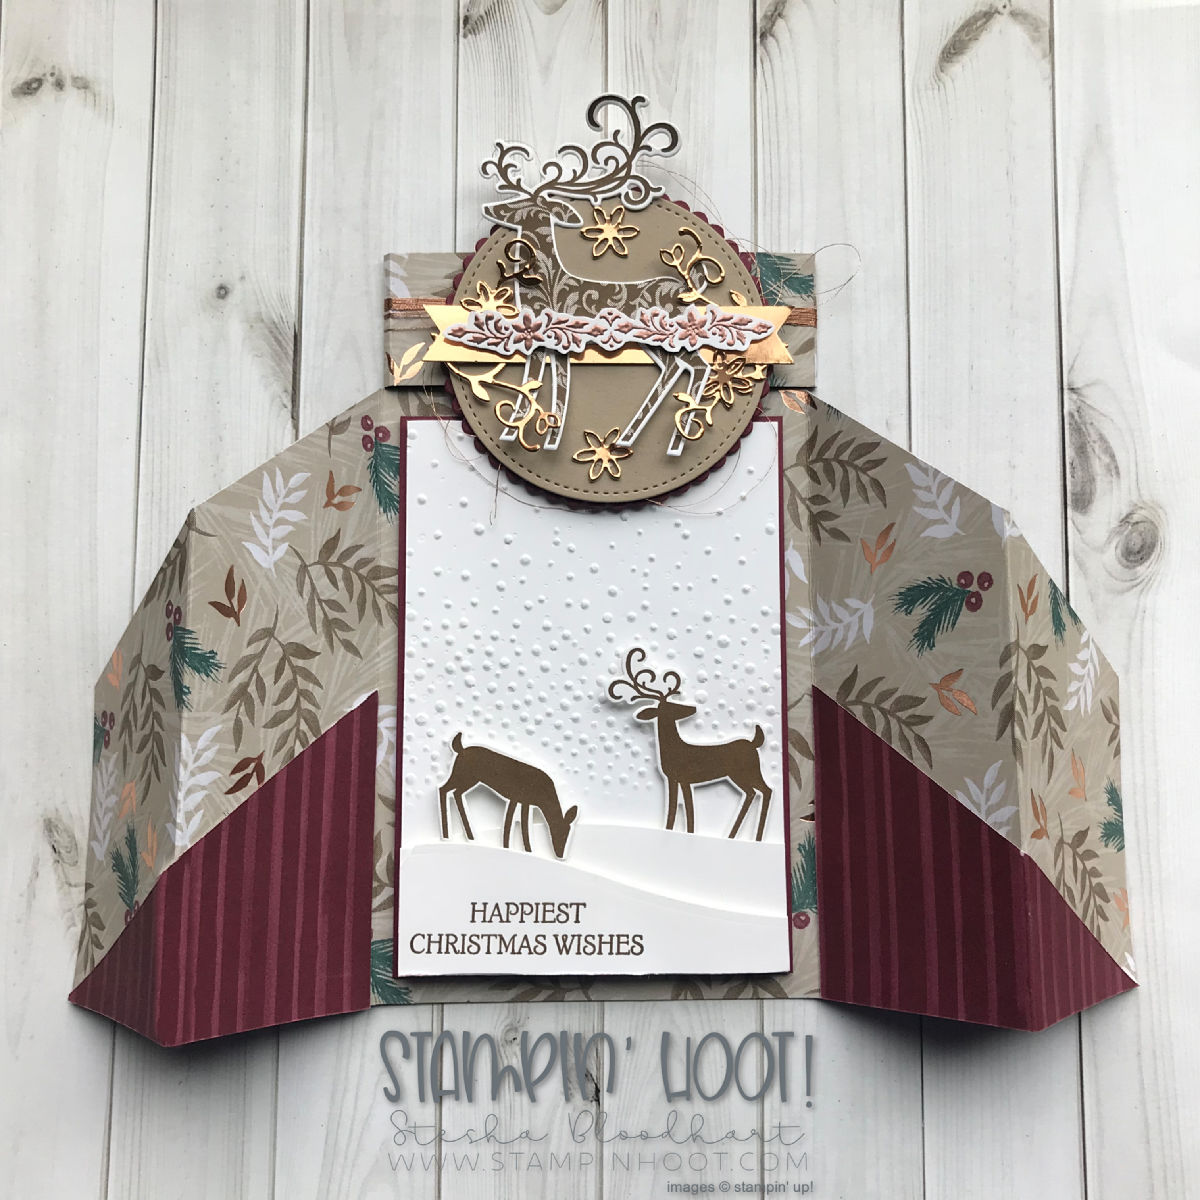 Dashing Deer Bundle by Stampin' Up! Christmas Gatefold Card for the Pals Wicked Folds Blog Hop created by Stampin' Hoot! Stesha Bloodhart #stampinhoot #steshabloodhart